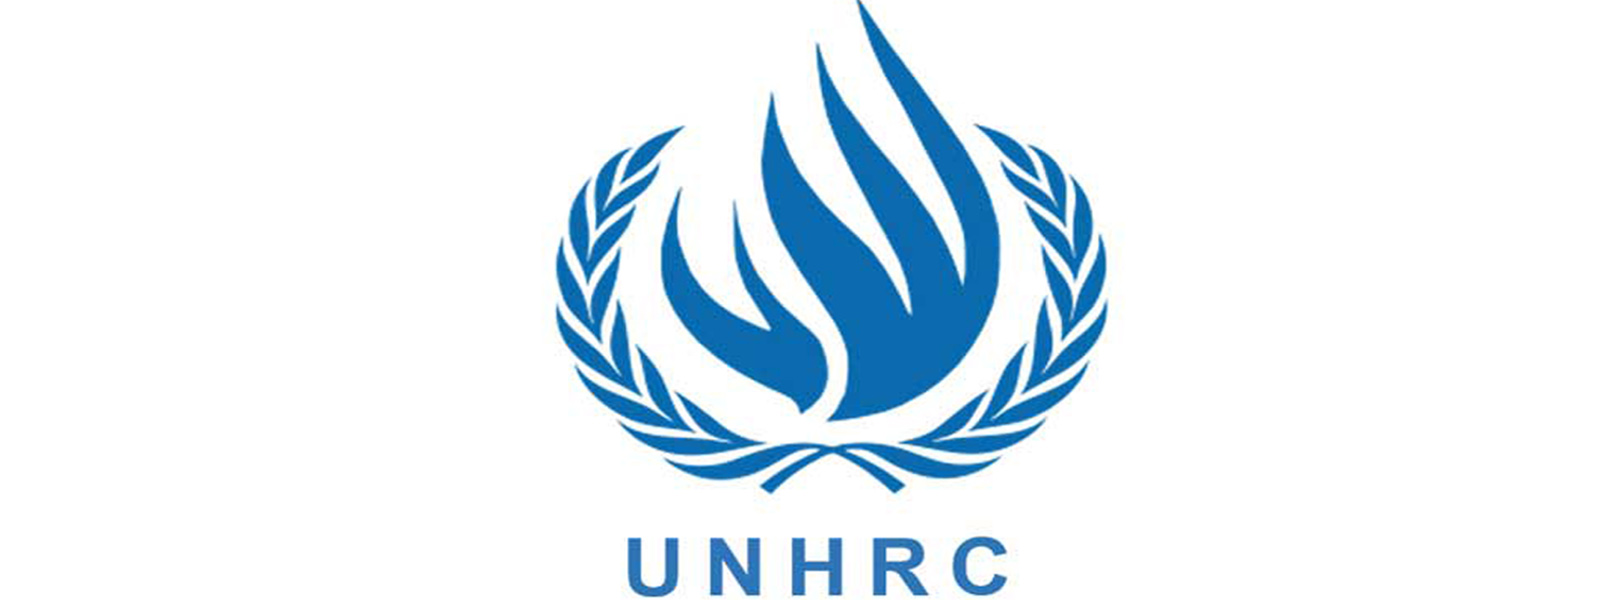 42nd UNHRC session commences in Geneva